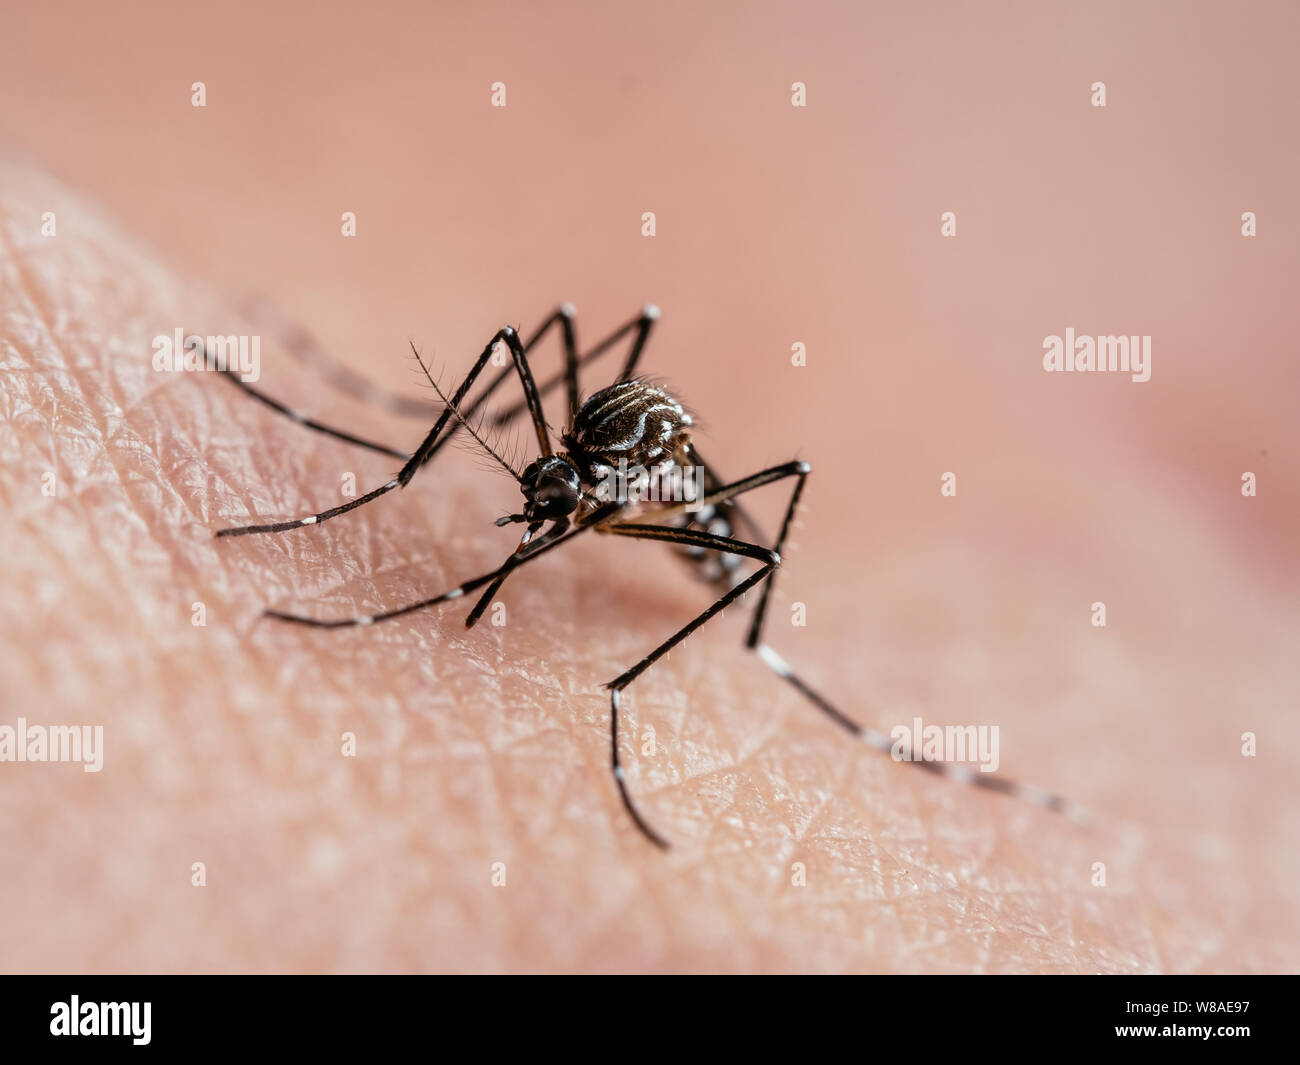 Macro of a yellow fever mosquito (Aedes aegypti) sucking blood from human skin Stock Photo